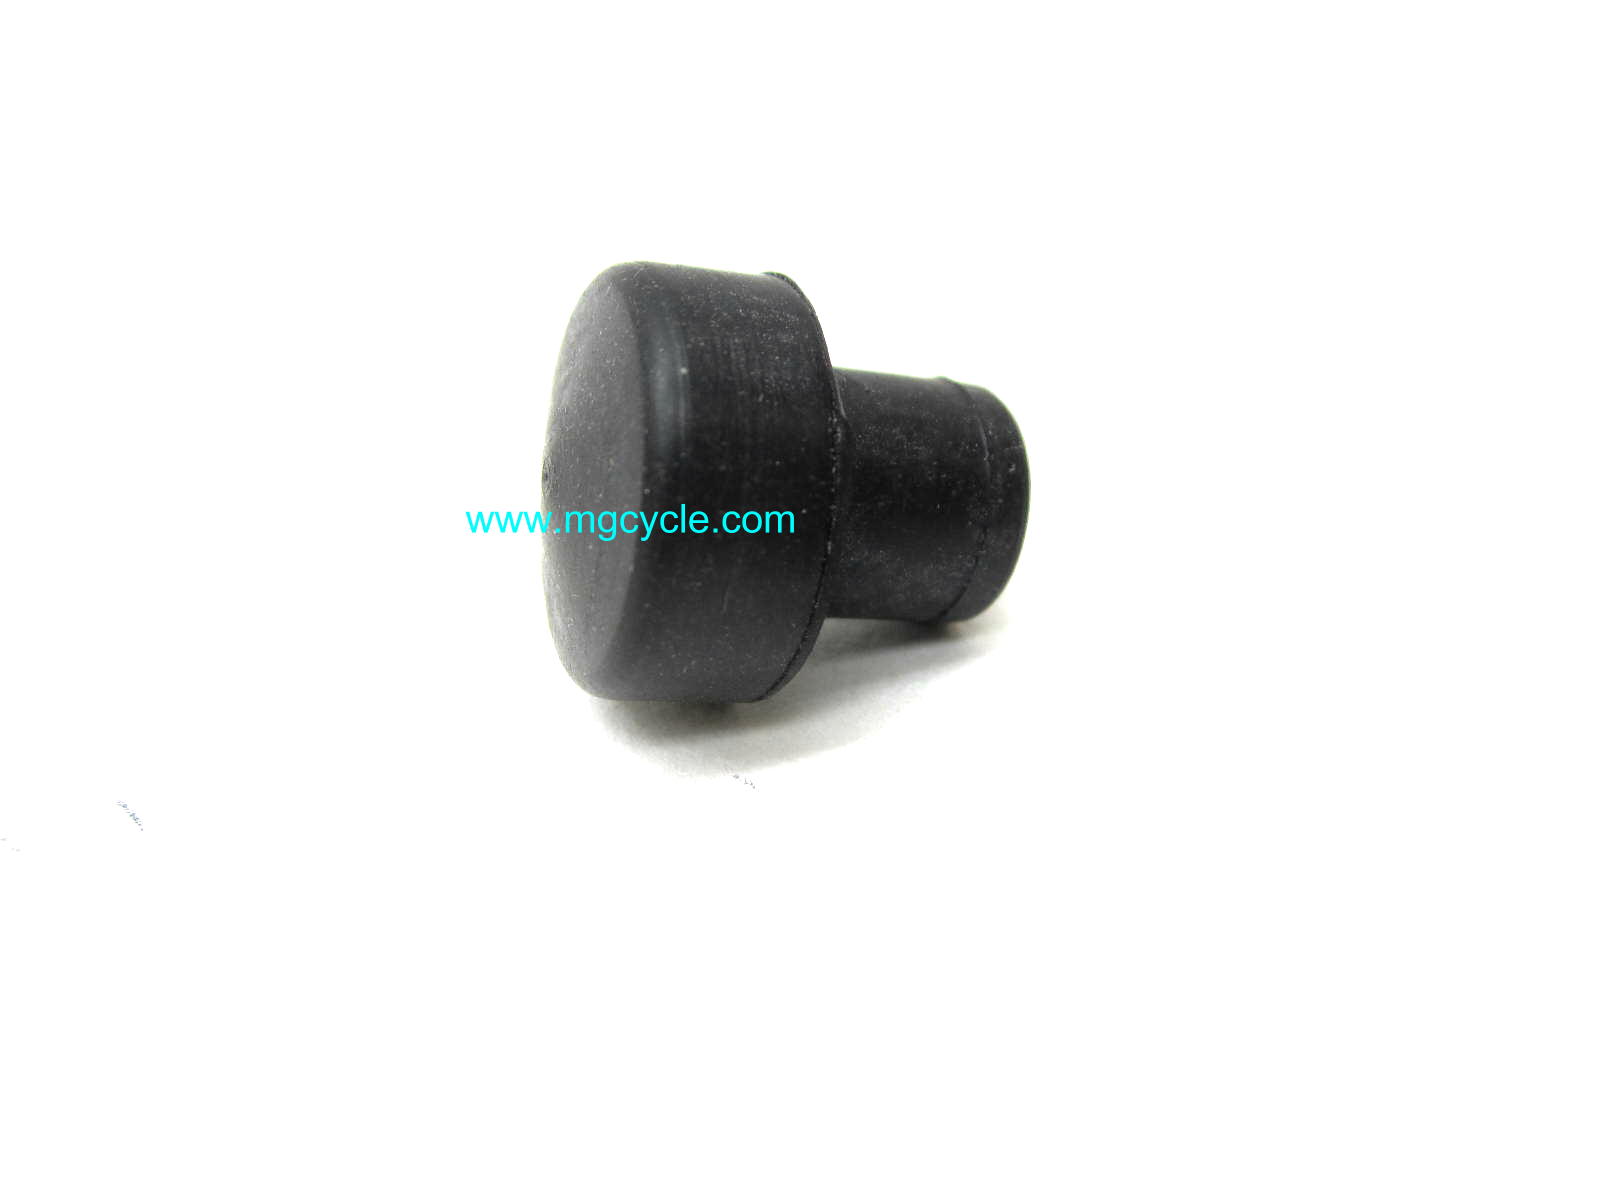 Rubber bumper for side/center stands and other uses GU12433000